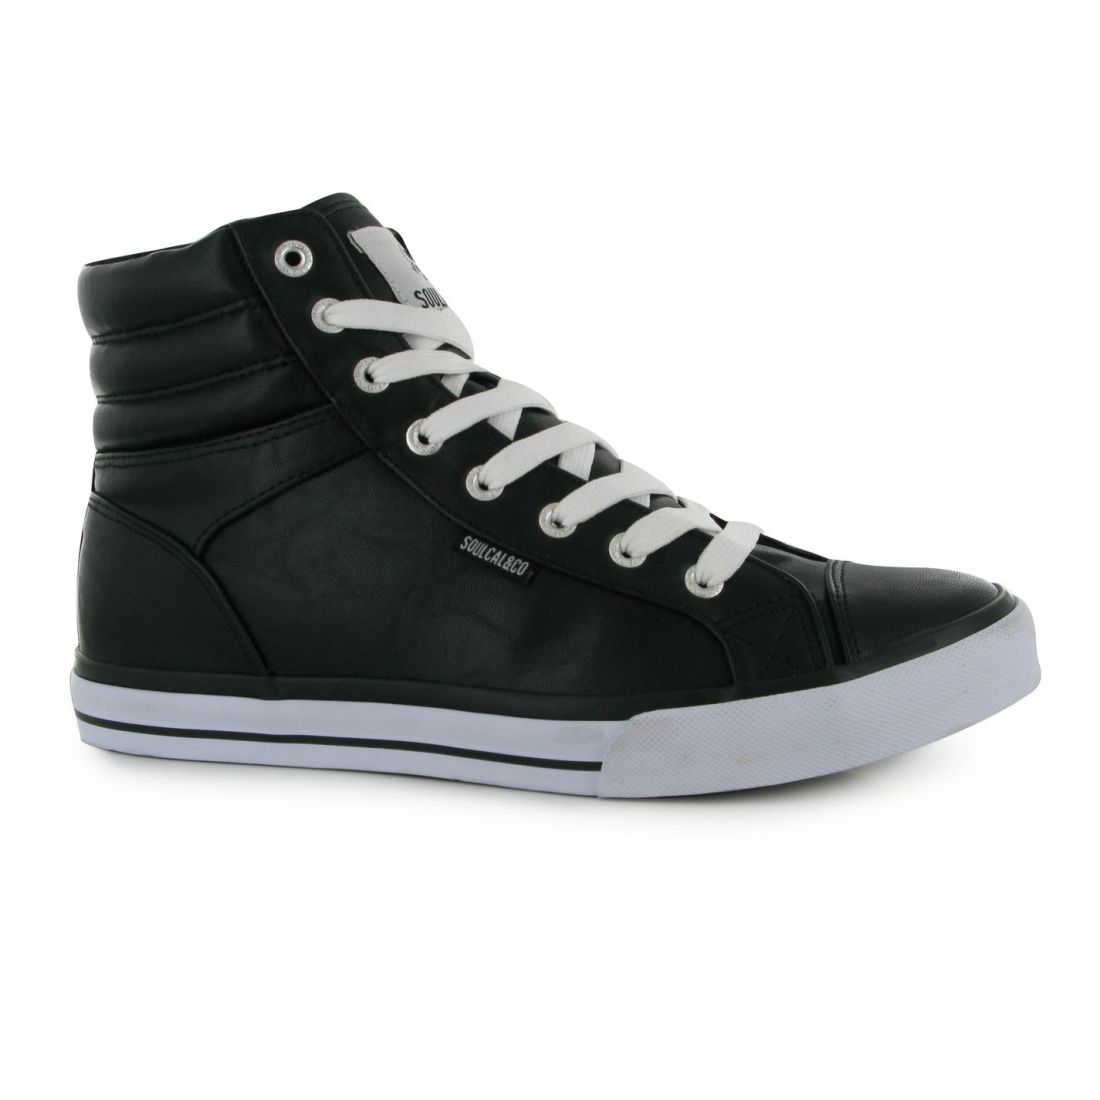 SoulCal Mens Asti Hi Tops Trainers Lace Up Shoes Smooth Toe Cap Rubber ...